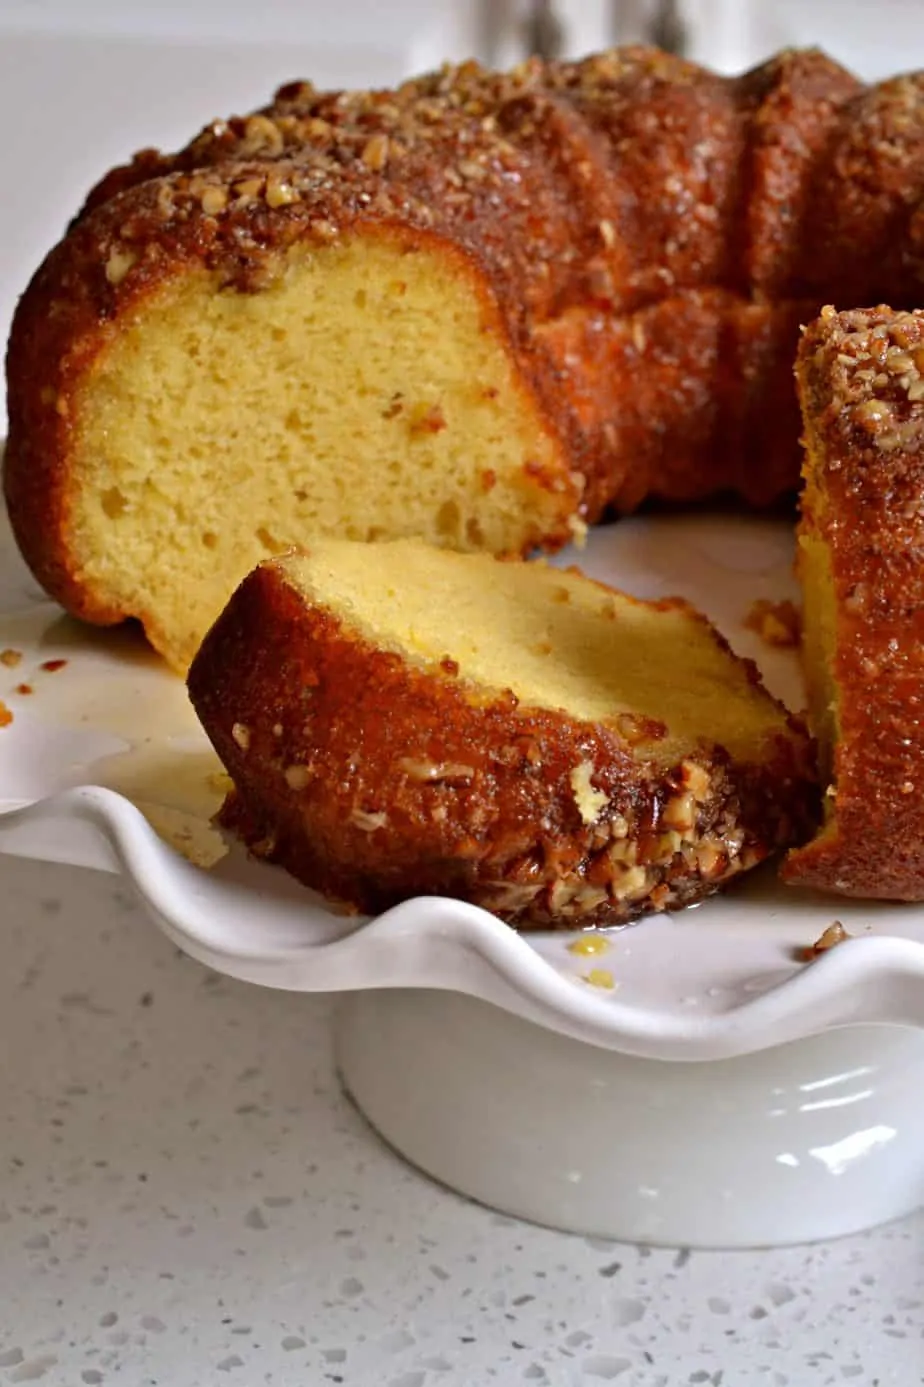 This rum cake is made super simple with a yellow butter cake mix but tastes just as delicious as a cake made from scratch.